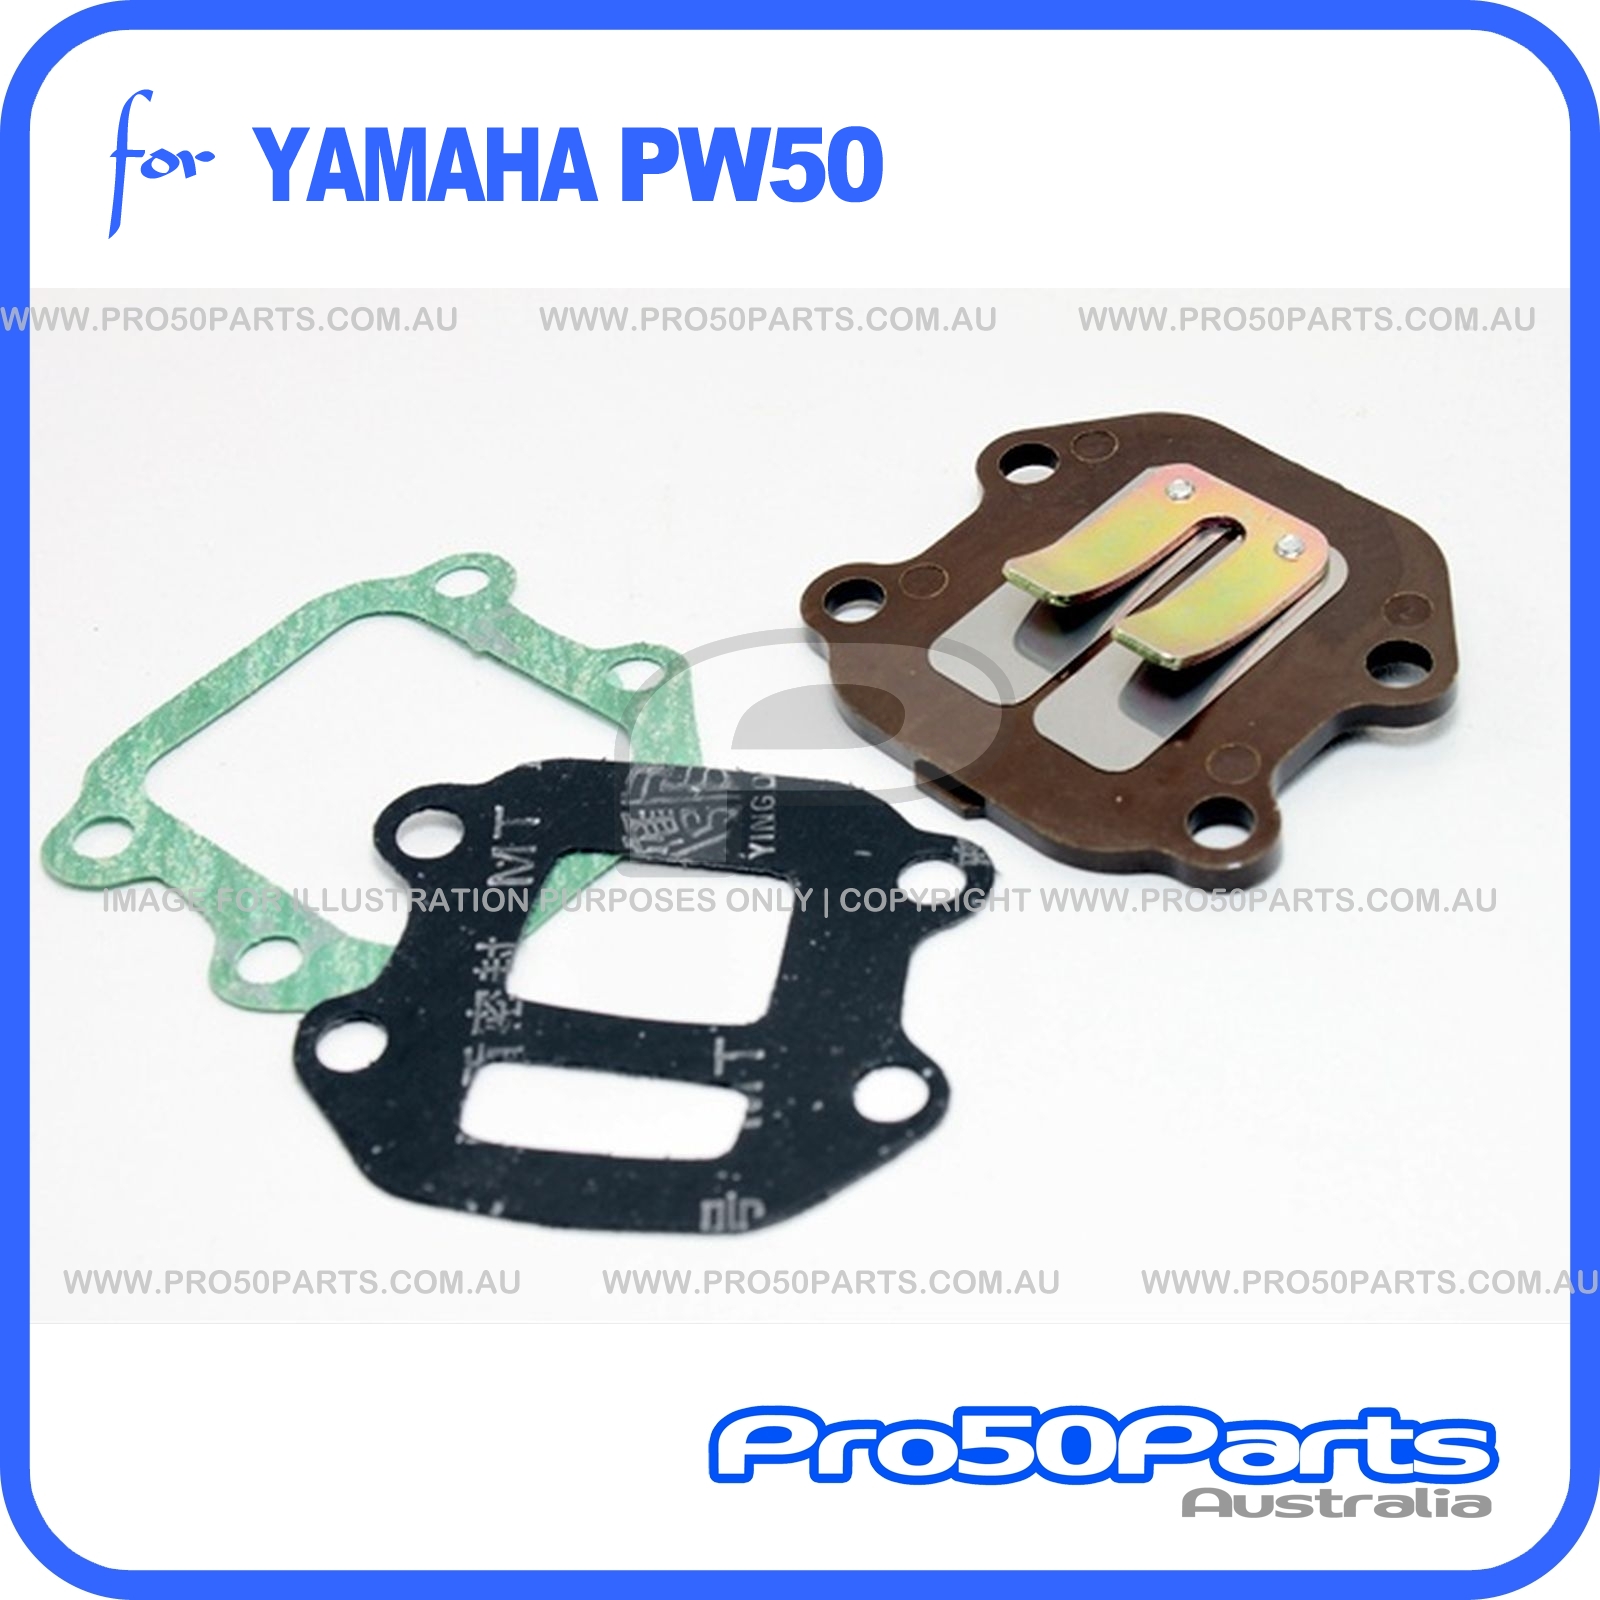 Zoom Zoom Parts Reed Valve Intake Valve Plate For 1981-2009 Yamaha PW 50 PW50 Dirt Pit Bike Motor 